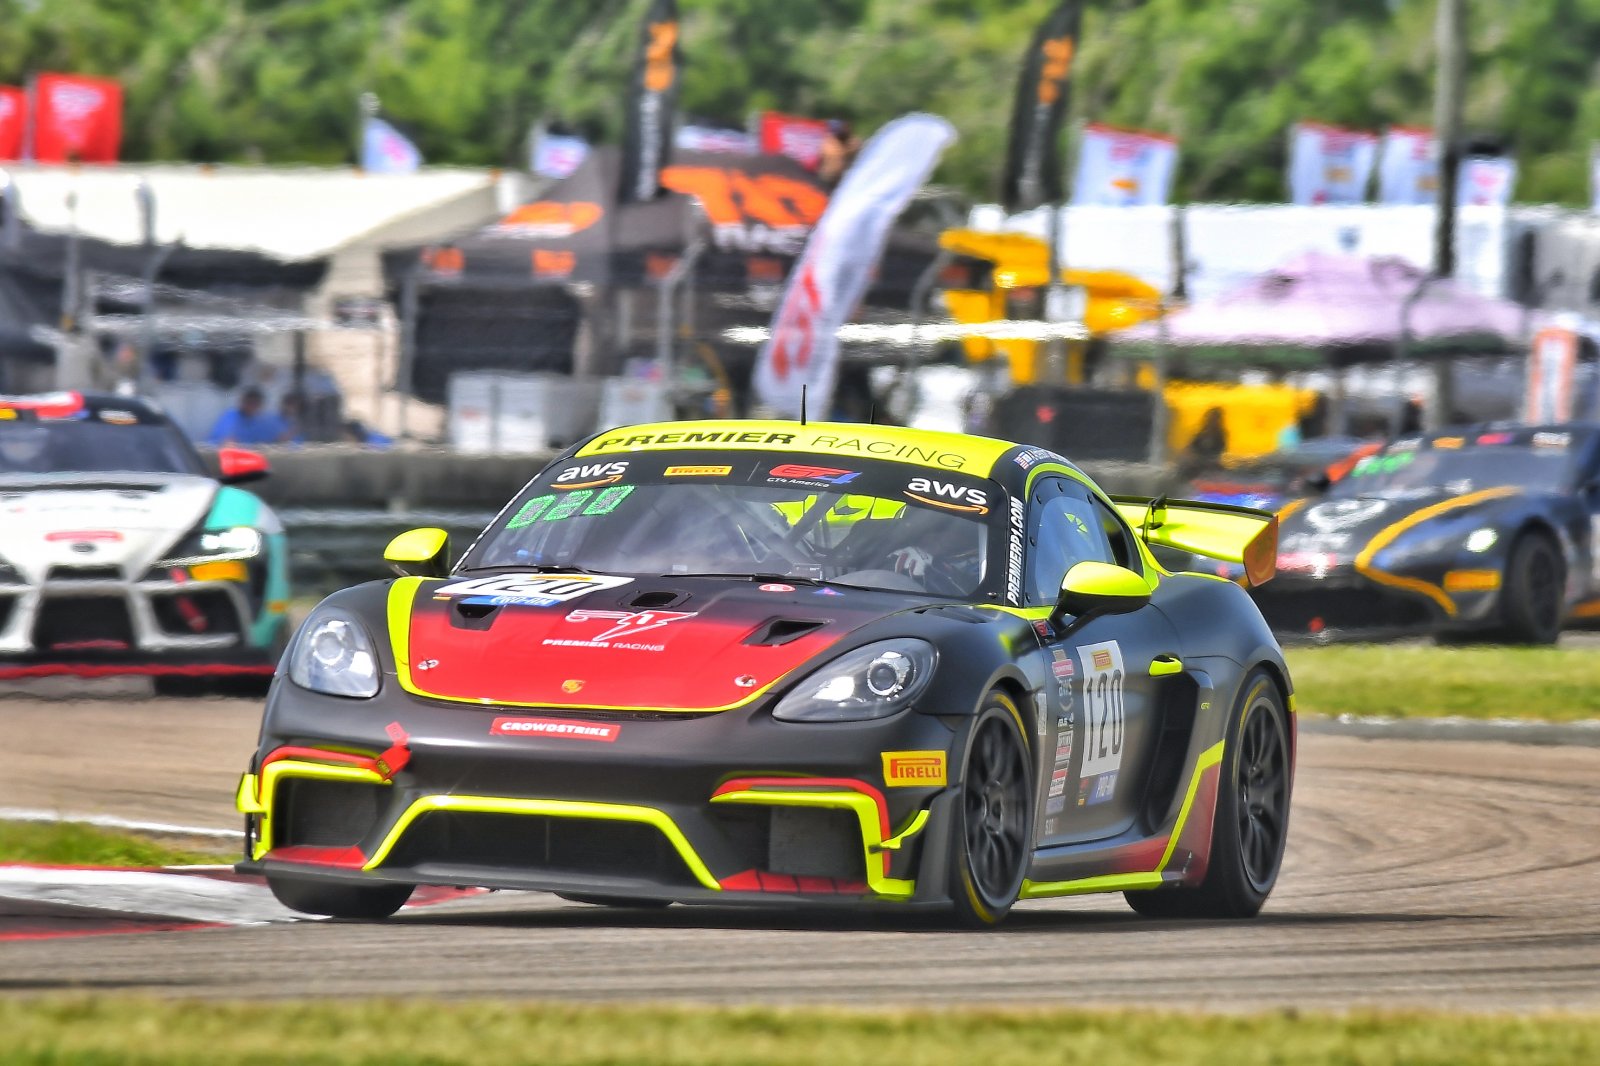 RS1 Leads the Field Overall and In Class for GT4 Race 1, Premier Racing Captures Pro/Am Pole